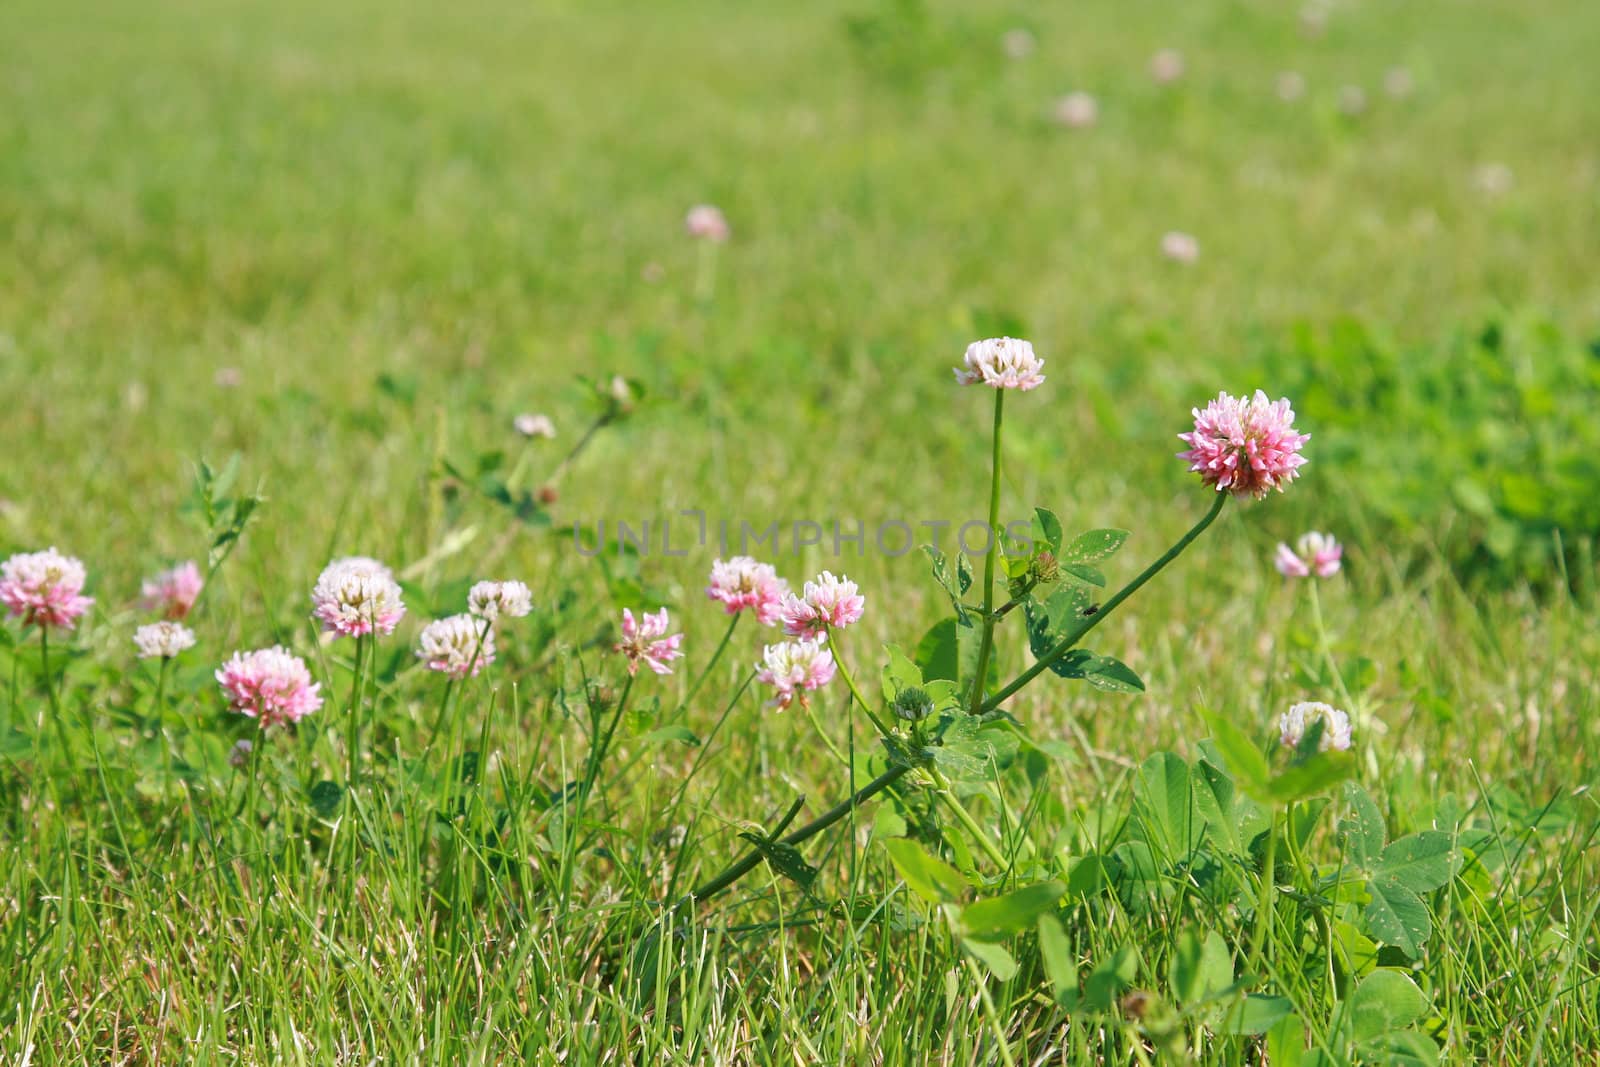 Pink flowers clover on a juicy green lawn